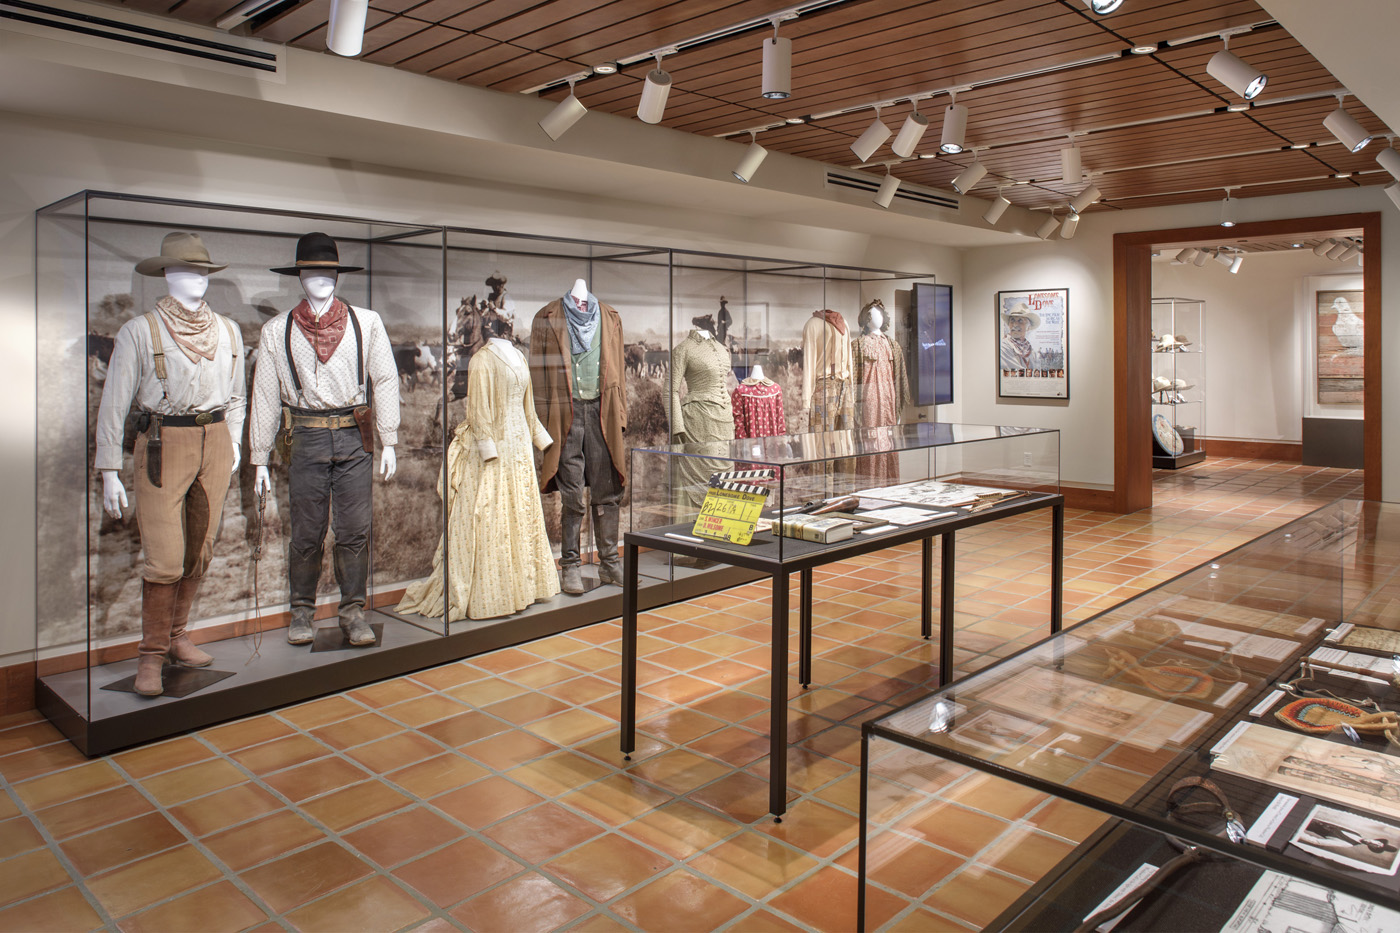 Bright exhibit room with row of mannequins in Historic western attire.